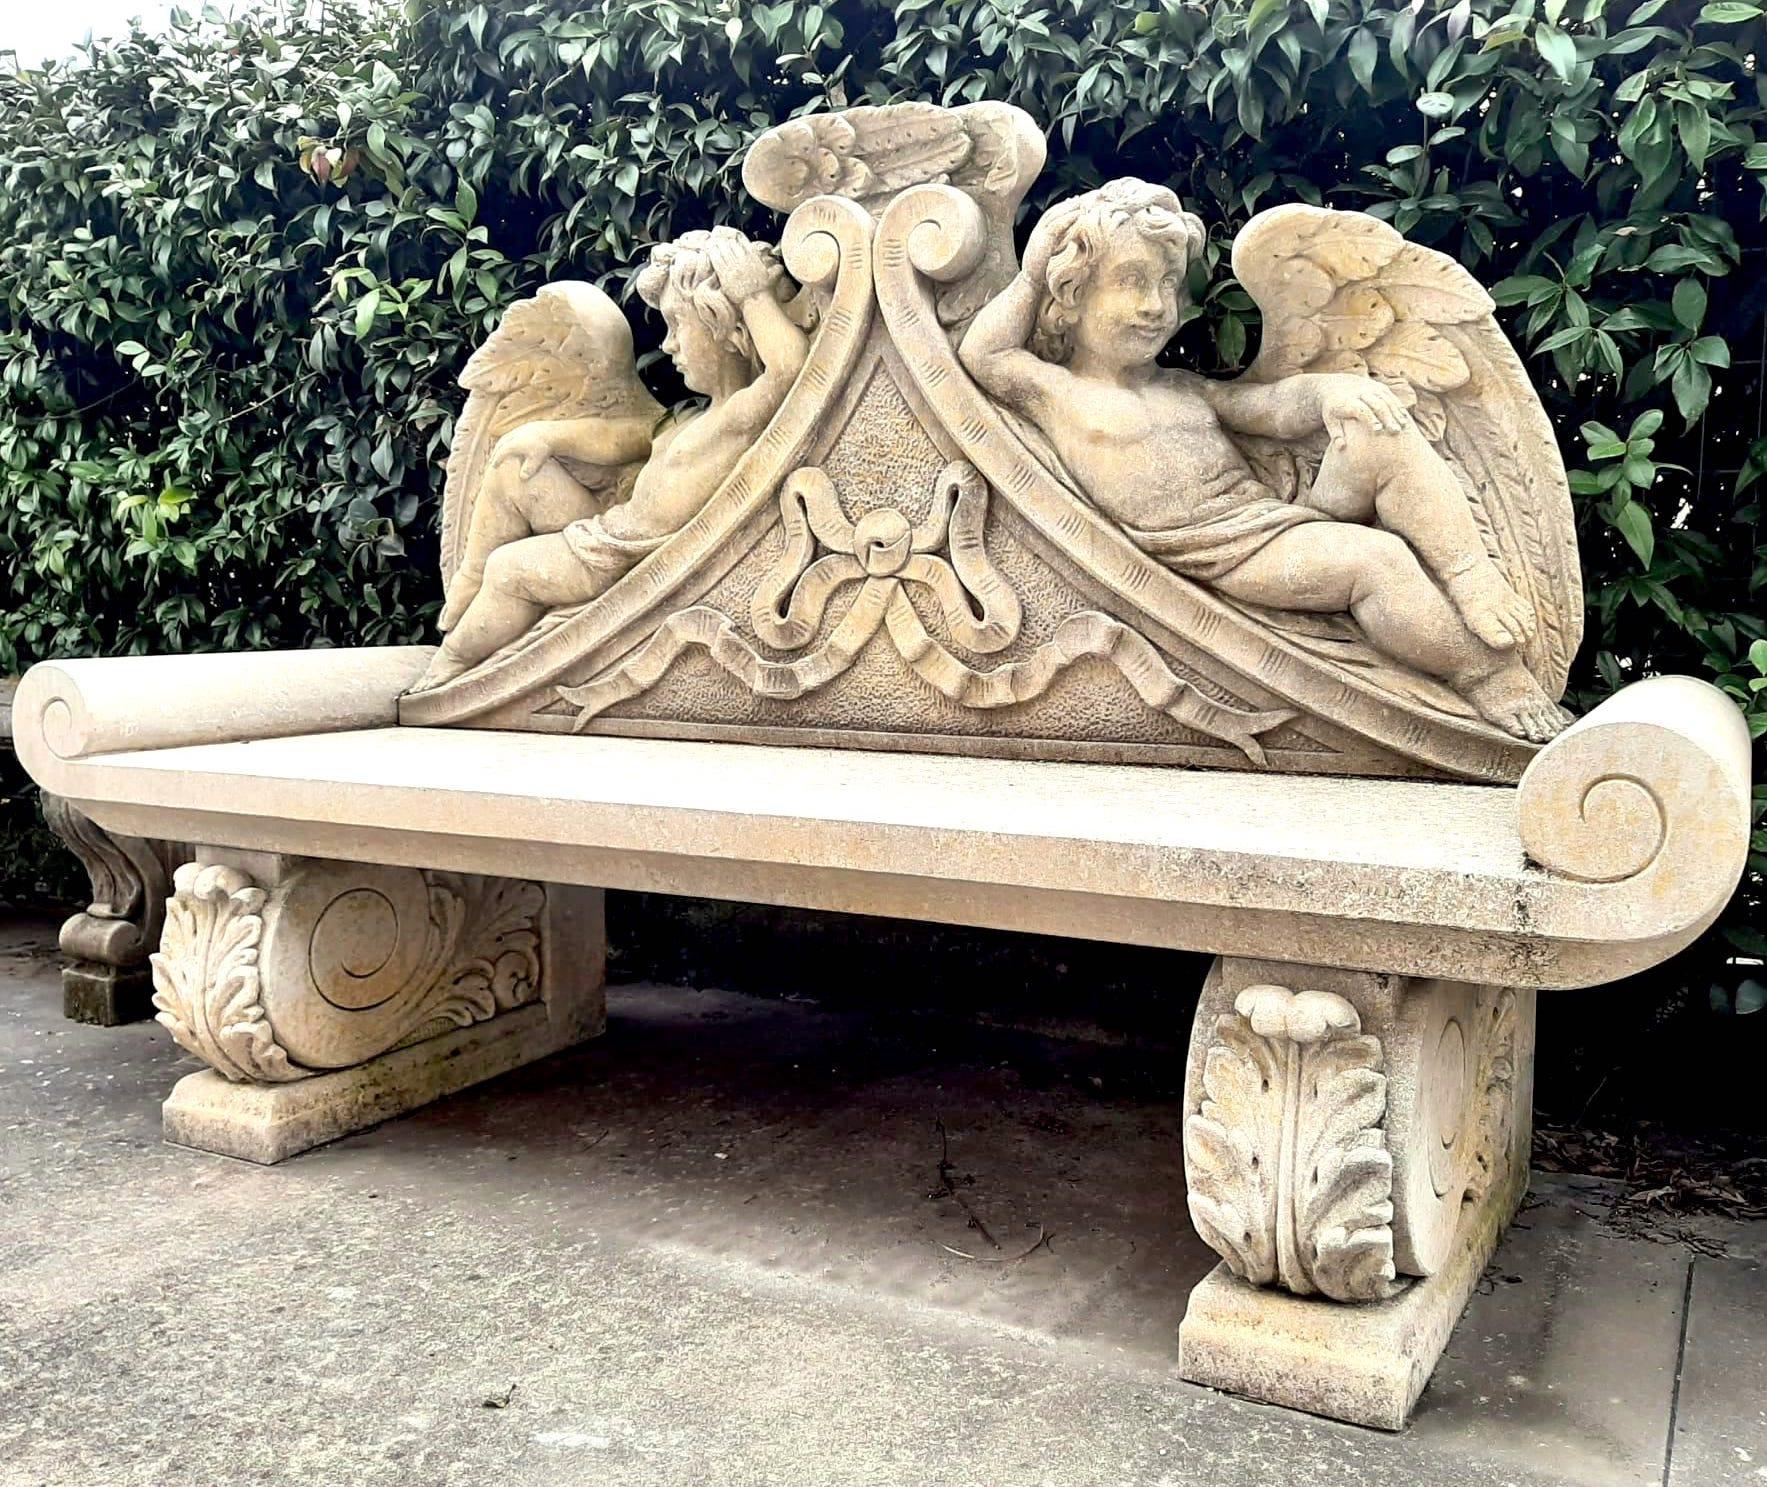 20th Century Outdoor Italian Finely Carved Large Lime Stone Bench Garden Furniture For Sale